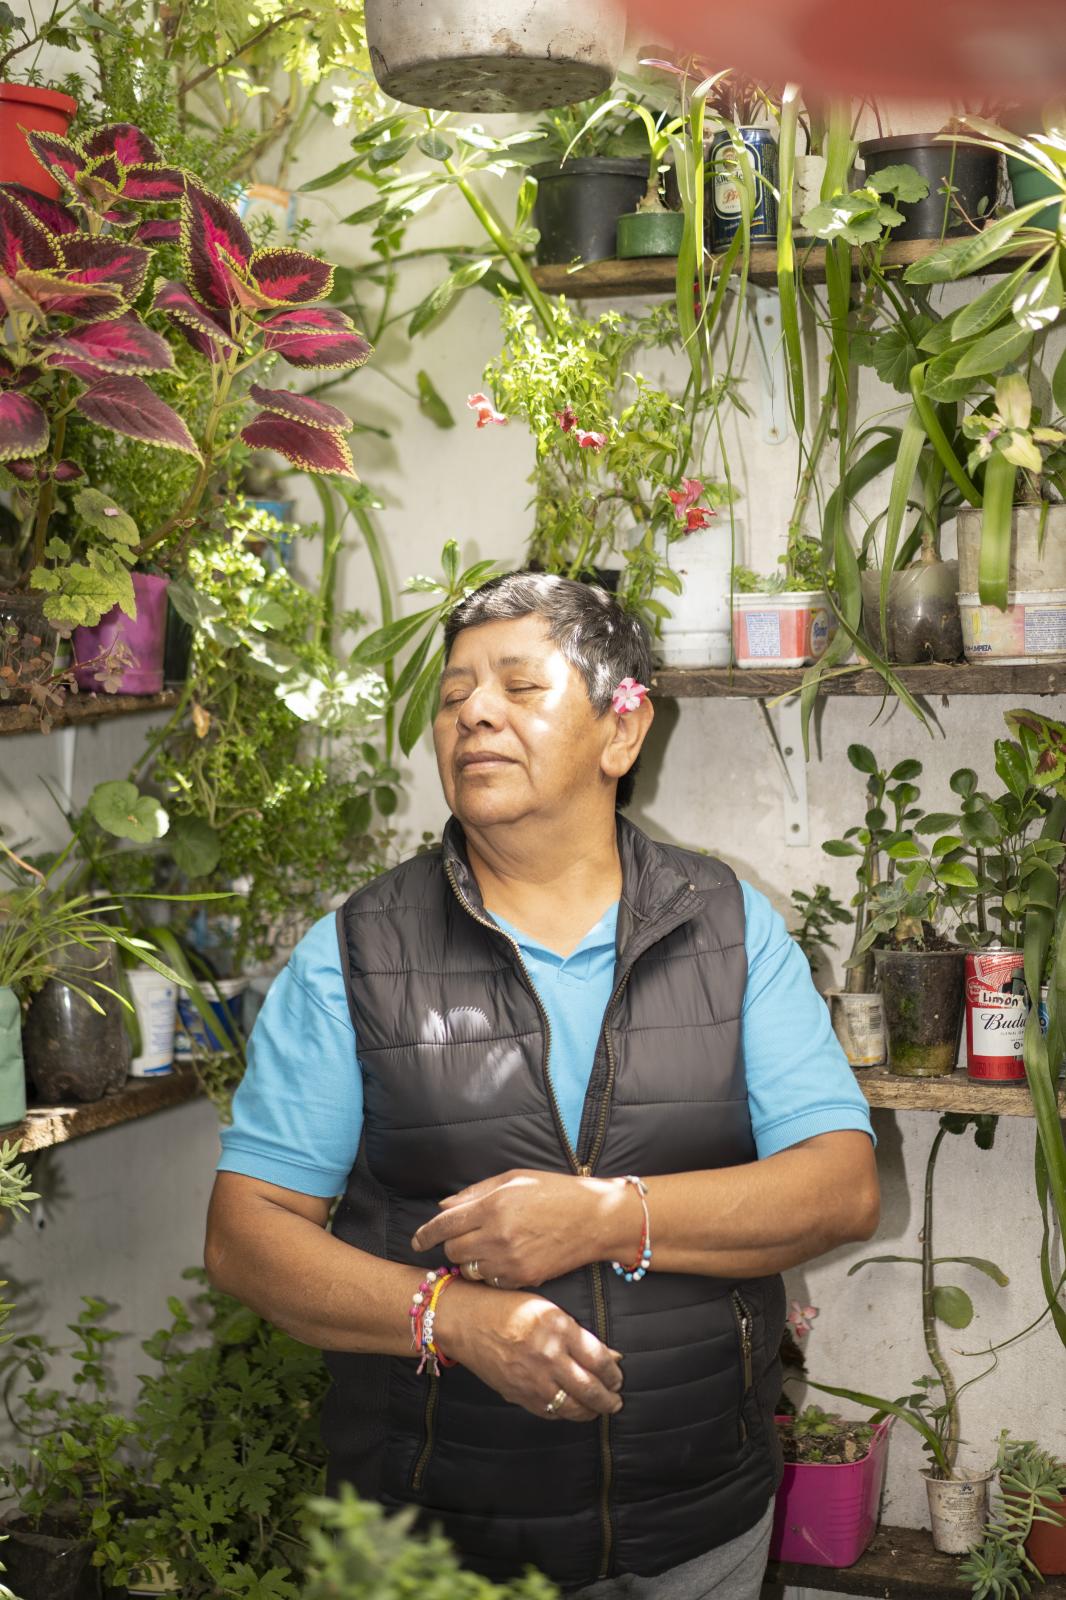 Cleanest neighborhood - 15/03/22. Portrait of Ligia Sanabria (61) in her home garden that she has built for 30 years....